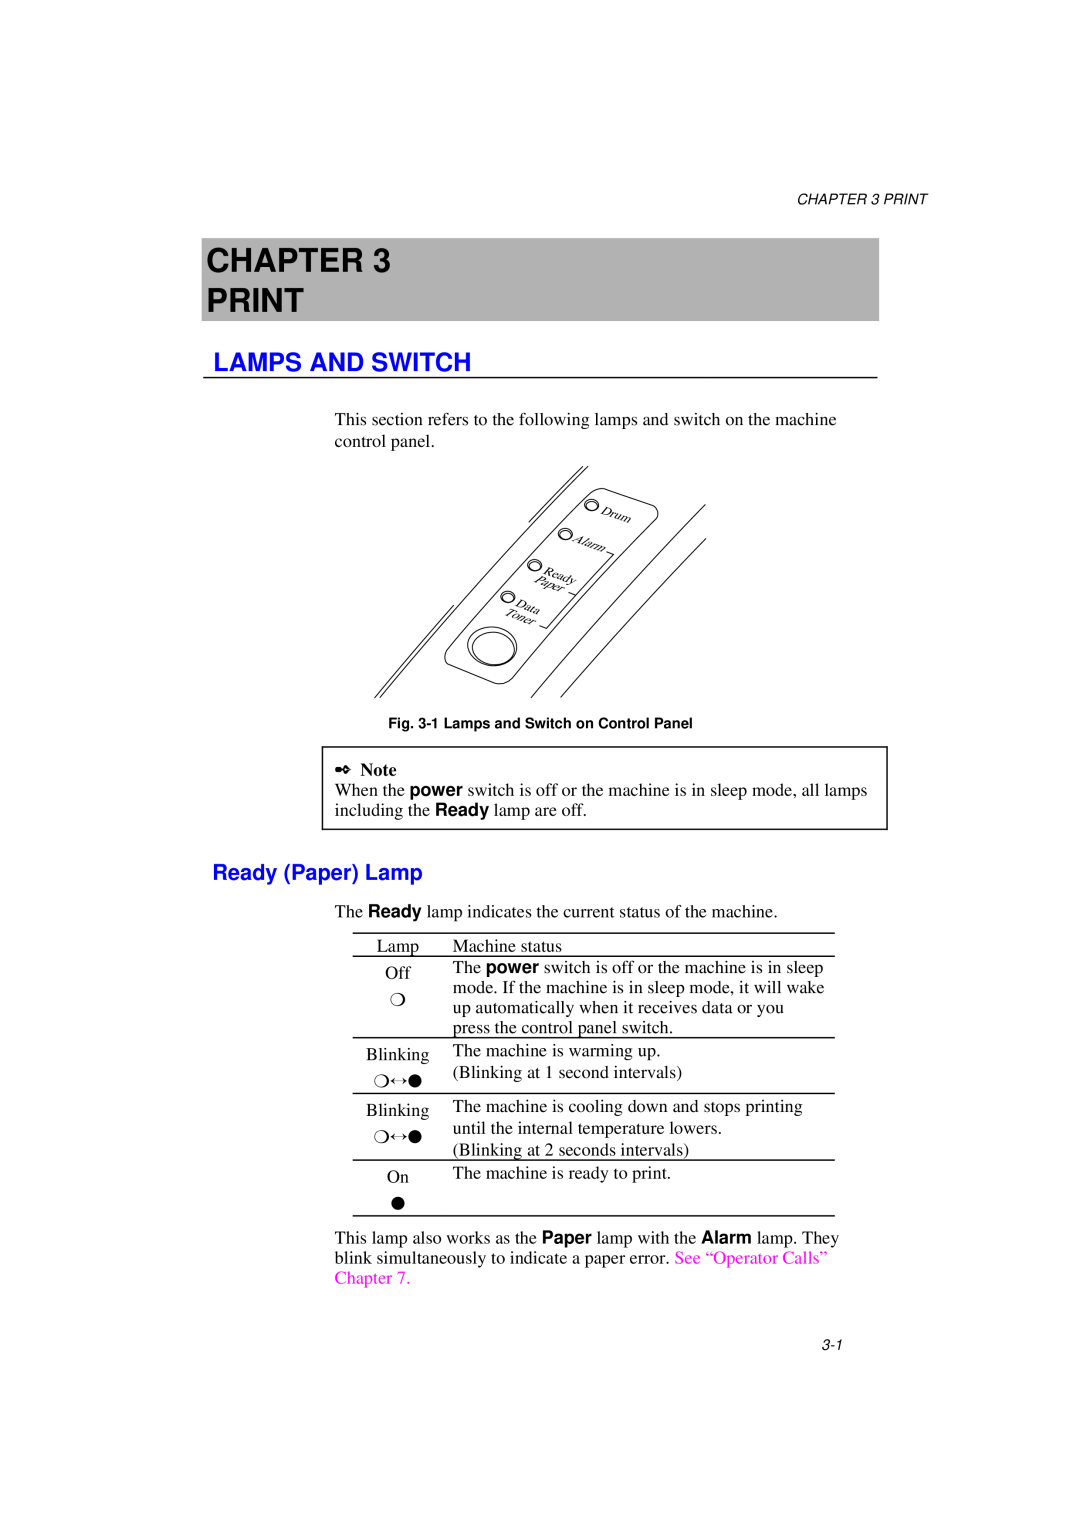 Brother MFC/HL-P2000 manual Chapter Print, Lamps And Switch, Ready Paper Lamp 